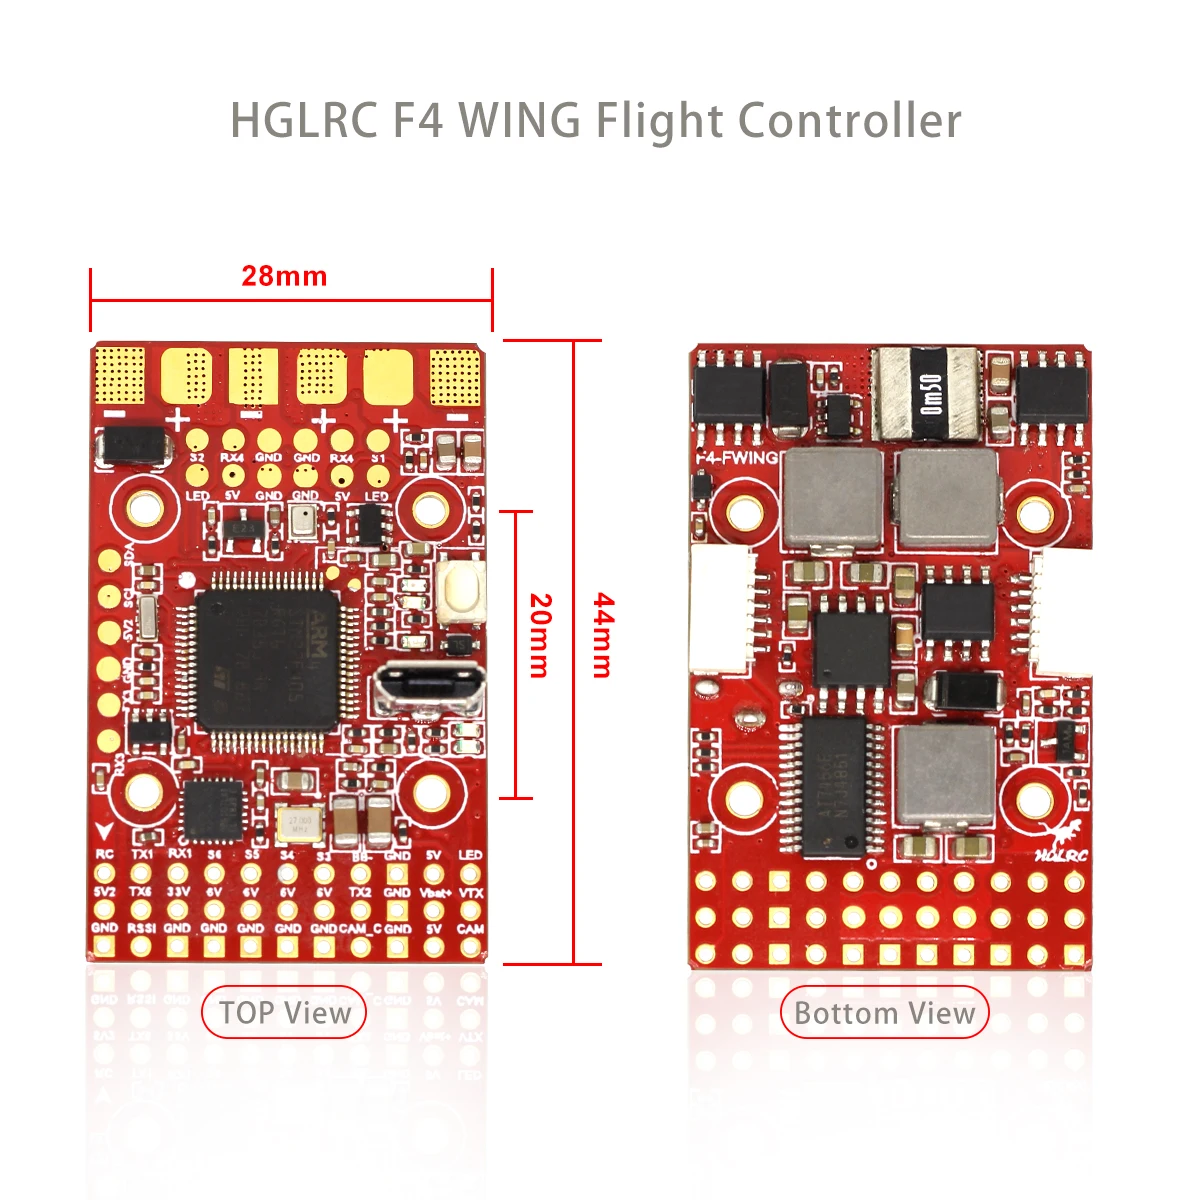 2021 NEW 20x20mm HGLRC F4 WING MPU6000 2-8S BEC 6V F405 Powerful 100A Integrated PDB Flight Controller for FPV Airplane Drones 1